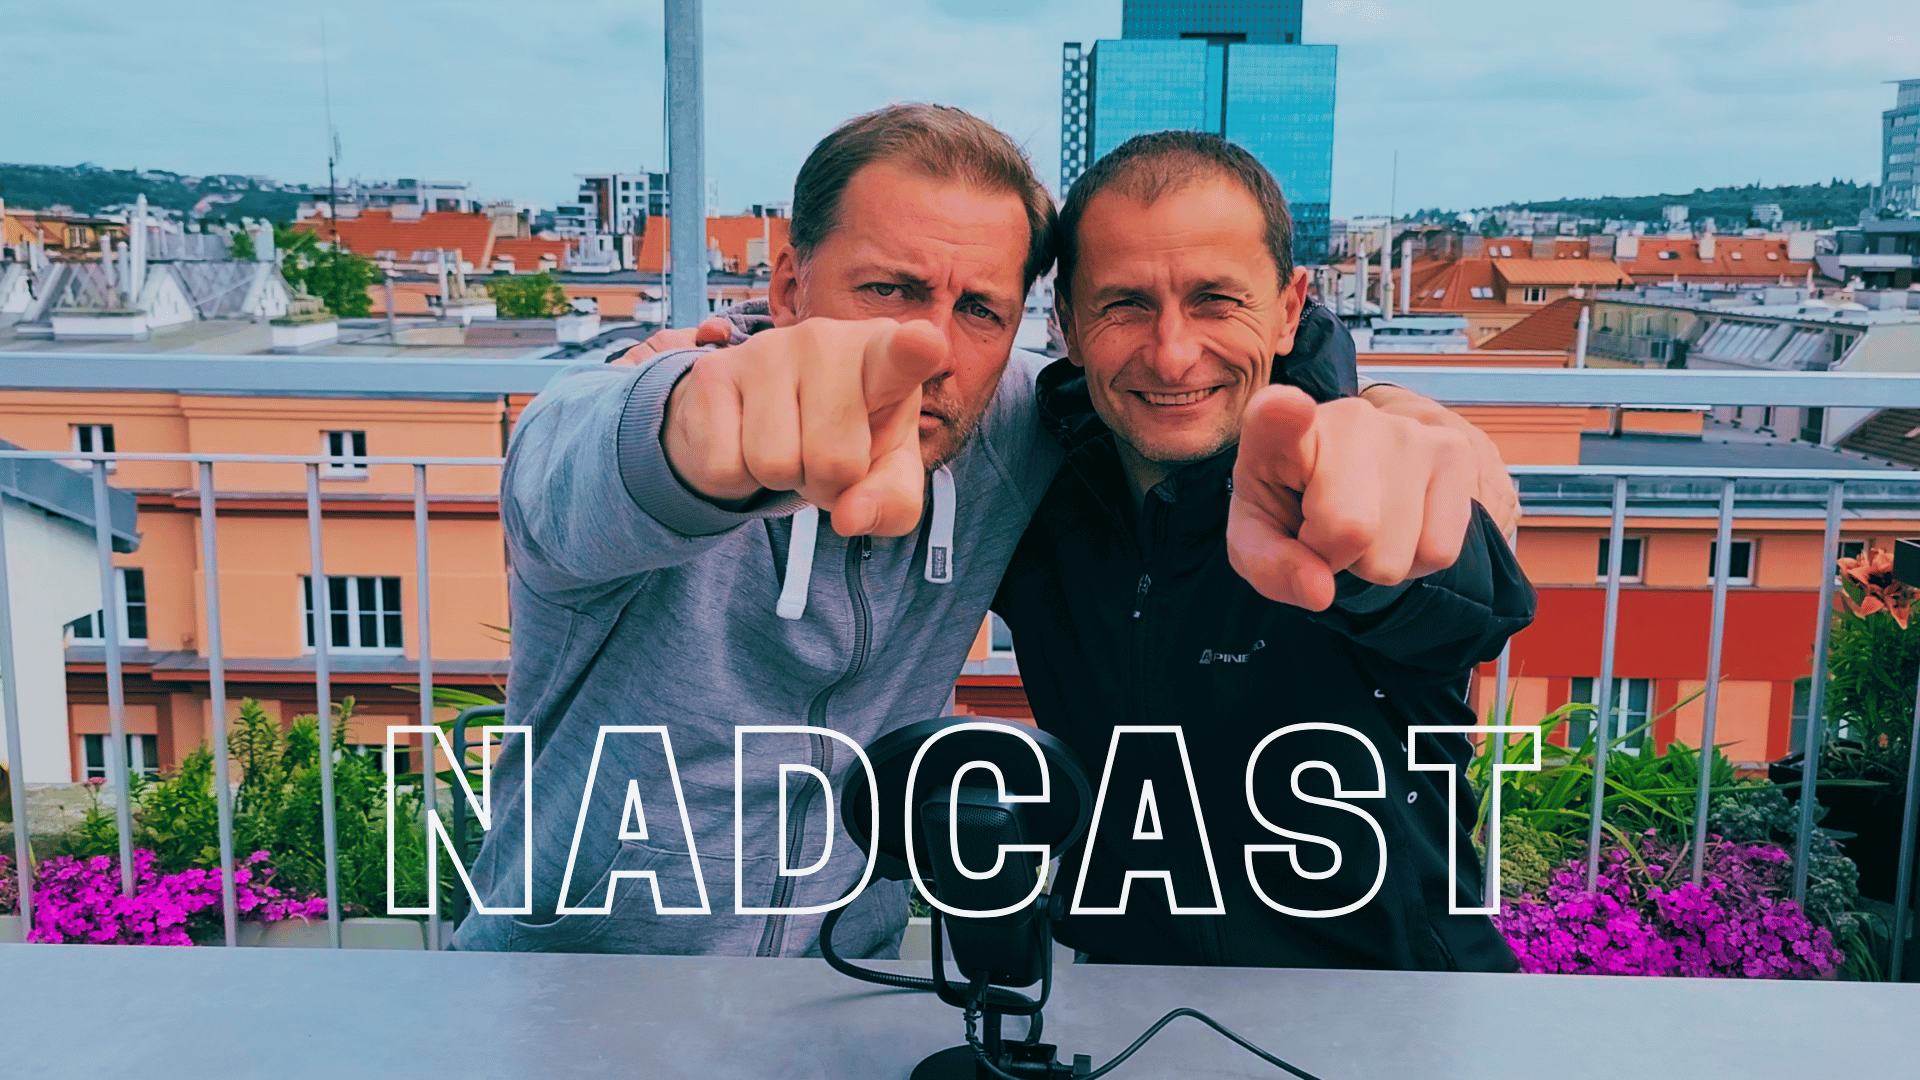 Nadcast cover 2